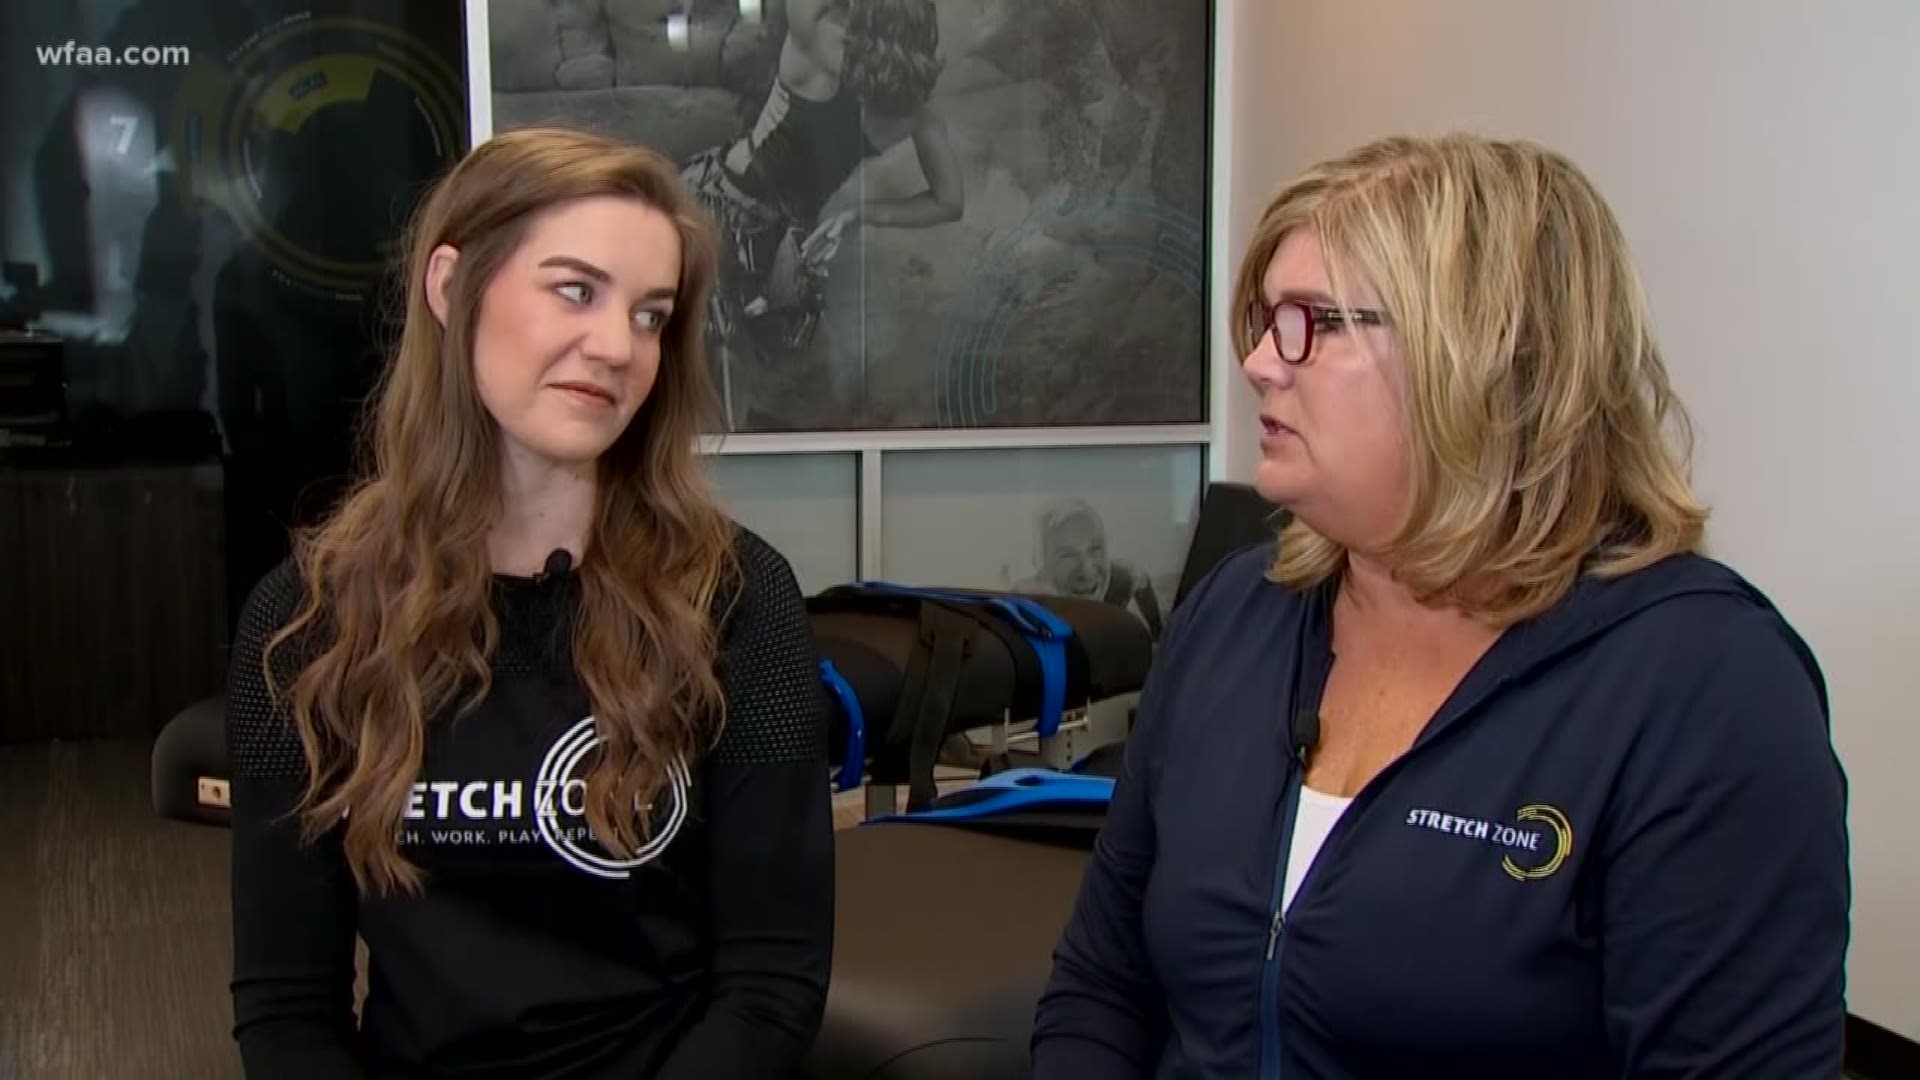 Mom and daughter stretch into business together